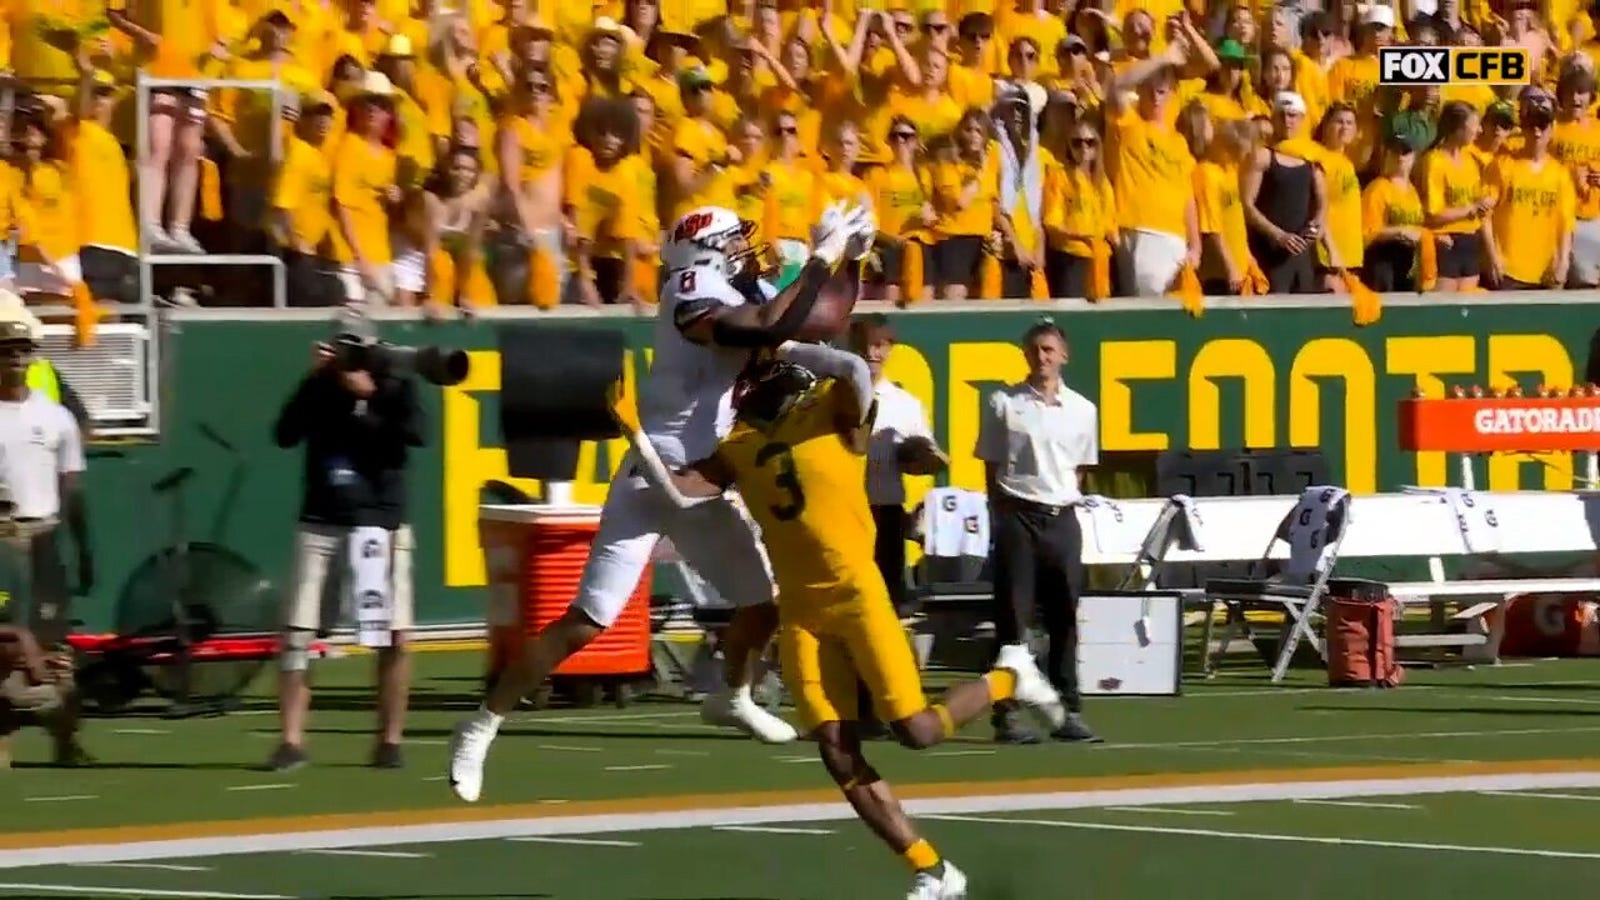 Unreal Catch puts Oklahoma's TD against Baylor